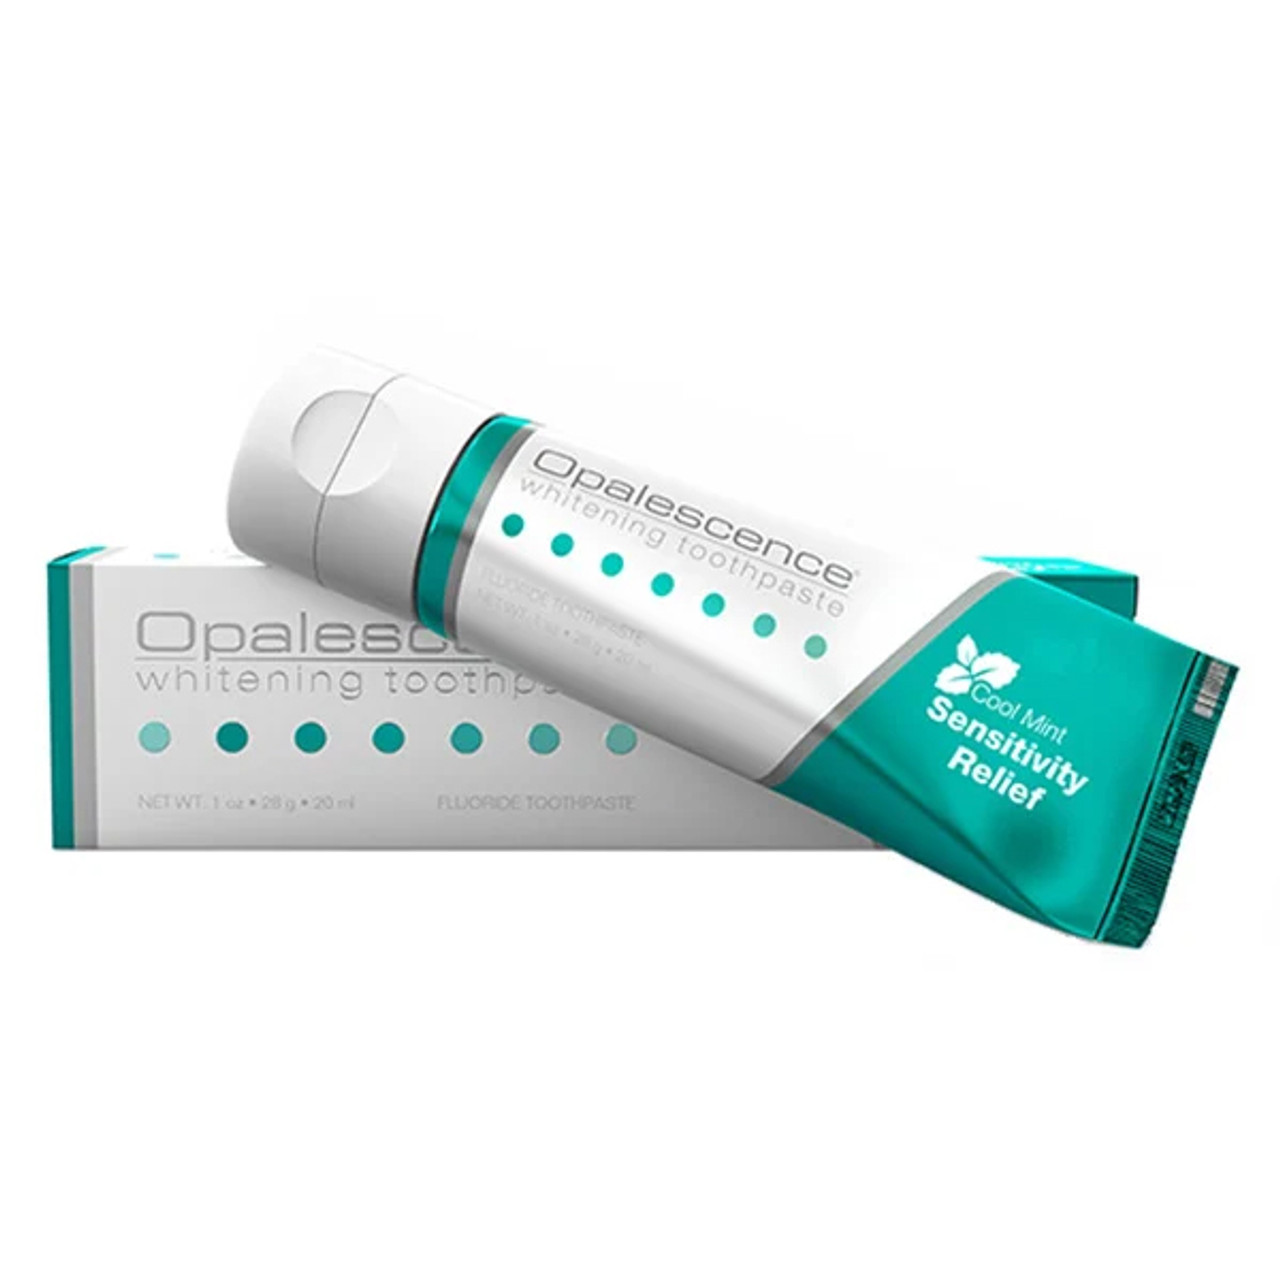 OPALESCENCE WHITENING TOOTHPASTE